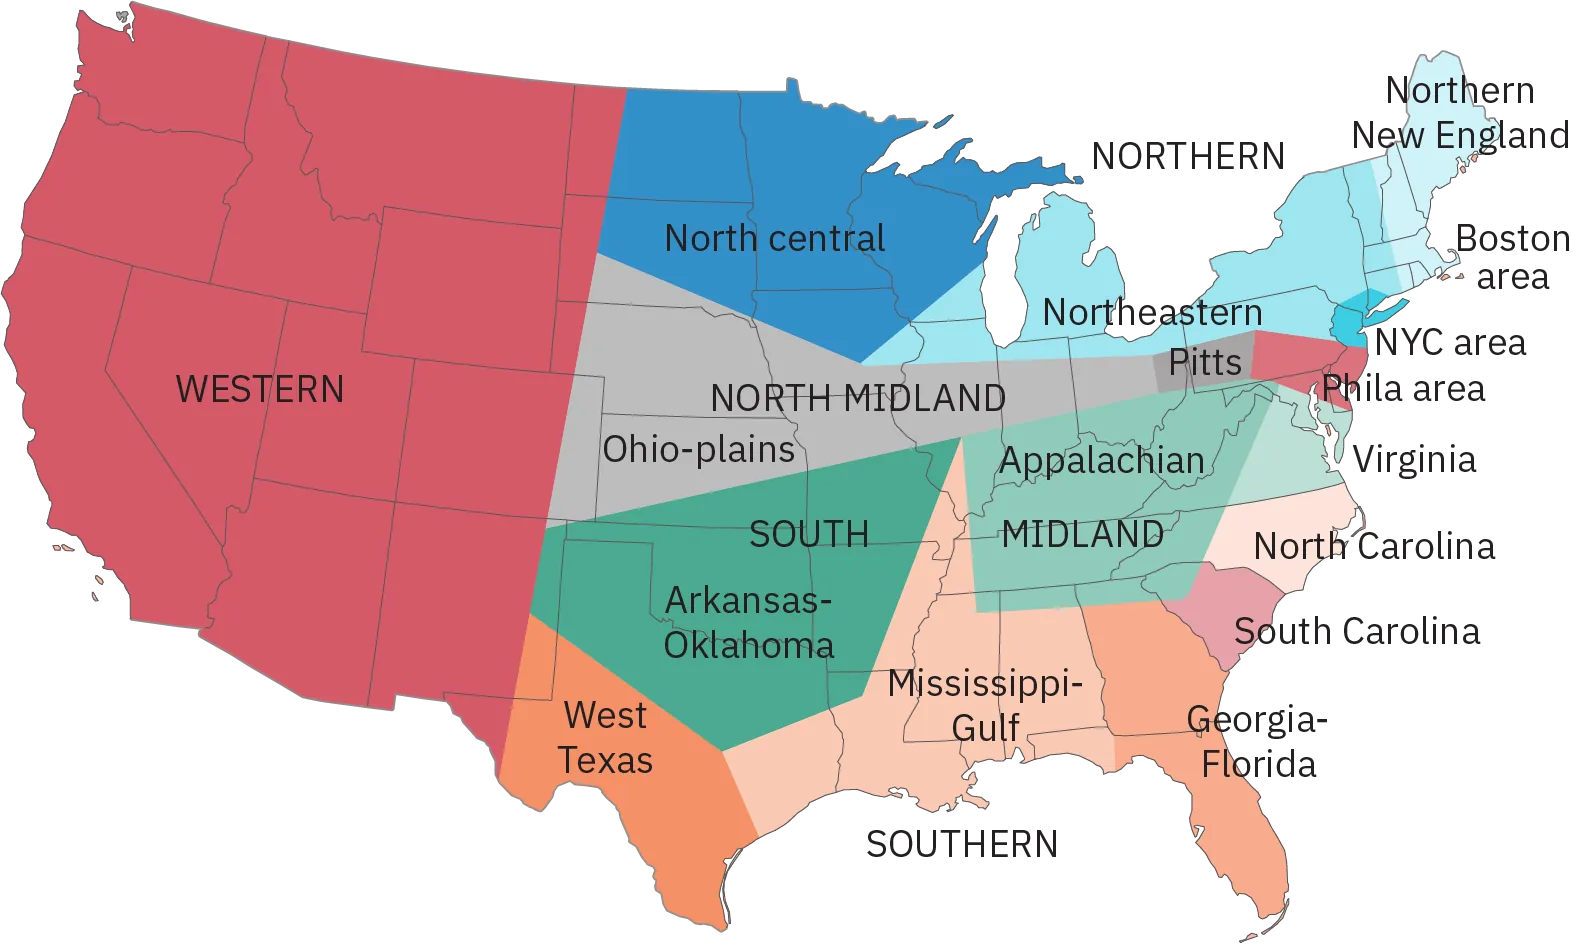 An outline of the United States with various regions outlined, shaded, and tagged with a speech dialect. Examples include: “Northern,” encompassing all of New England, Michigan, New York, and some areas of Pennsylvania and Ohio; “Georgia-Florida,” consisting of all of Florida and nearly all of Georgia; and “Western,” spreading to the Western coast from a line roughly beginning with the boarder of New Mexico with Texas and extending North.